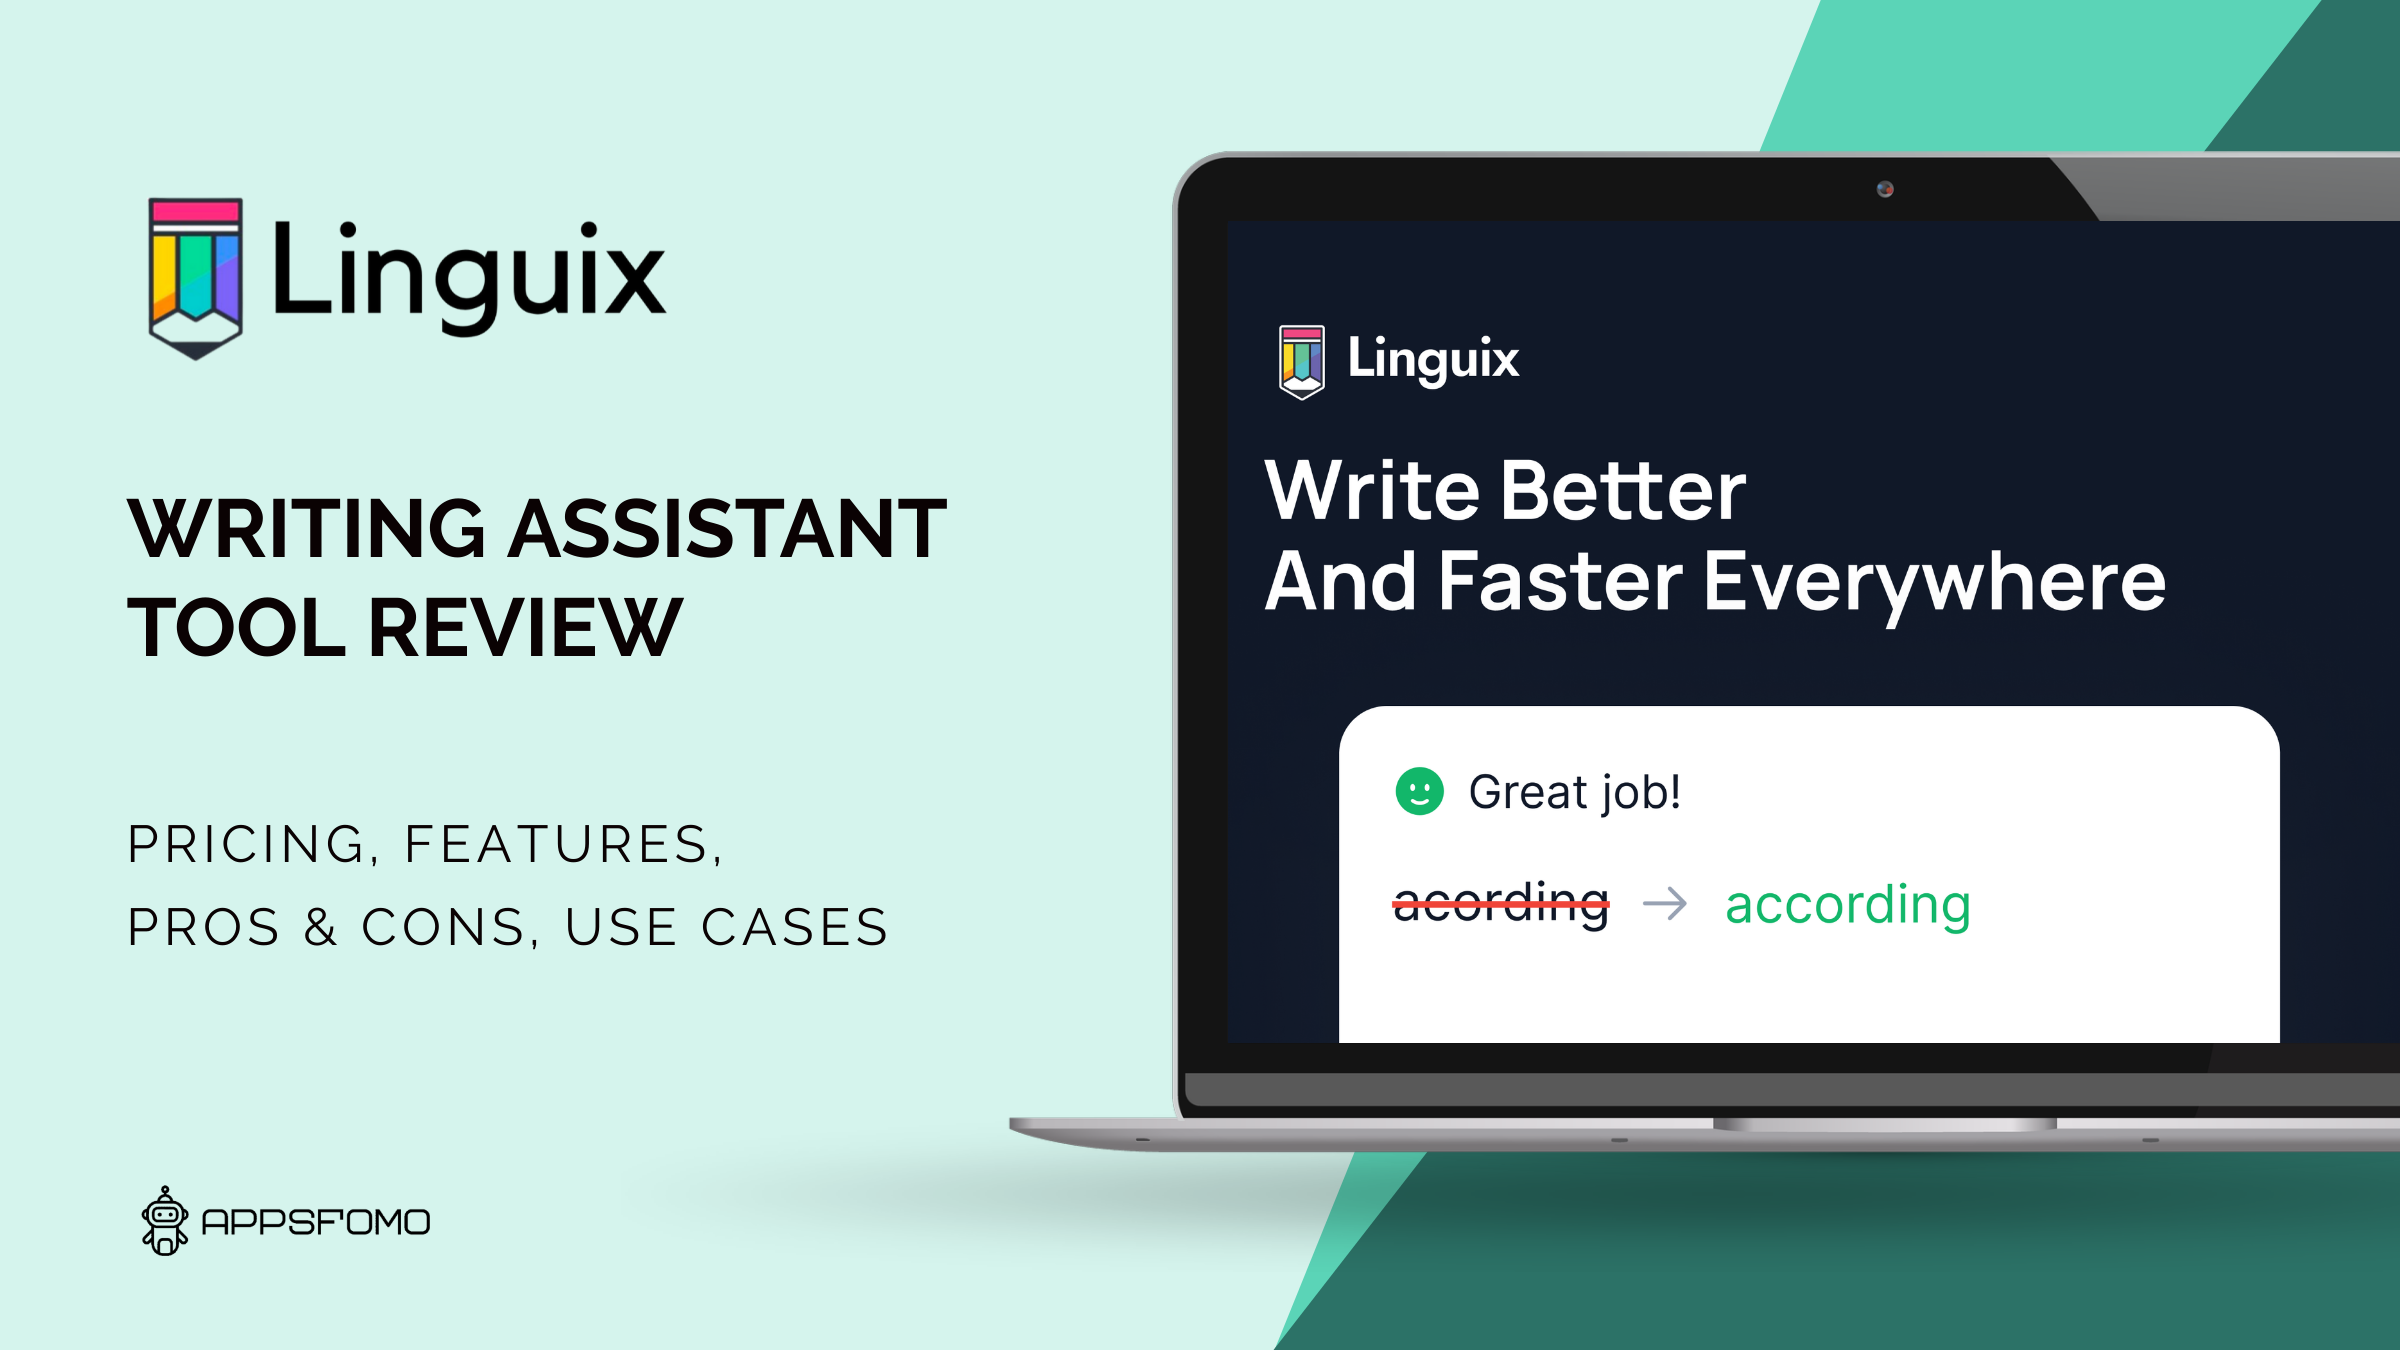 Linguix: Improve Your Writing With the AI Writing Assistant